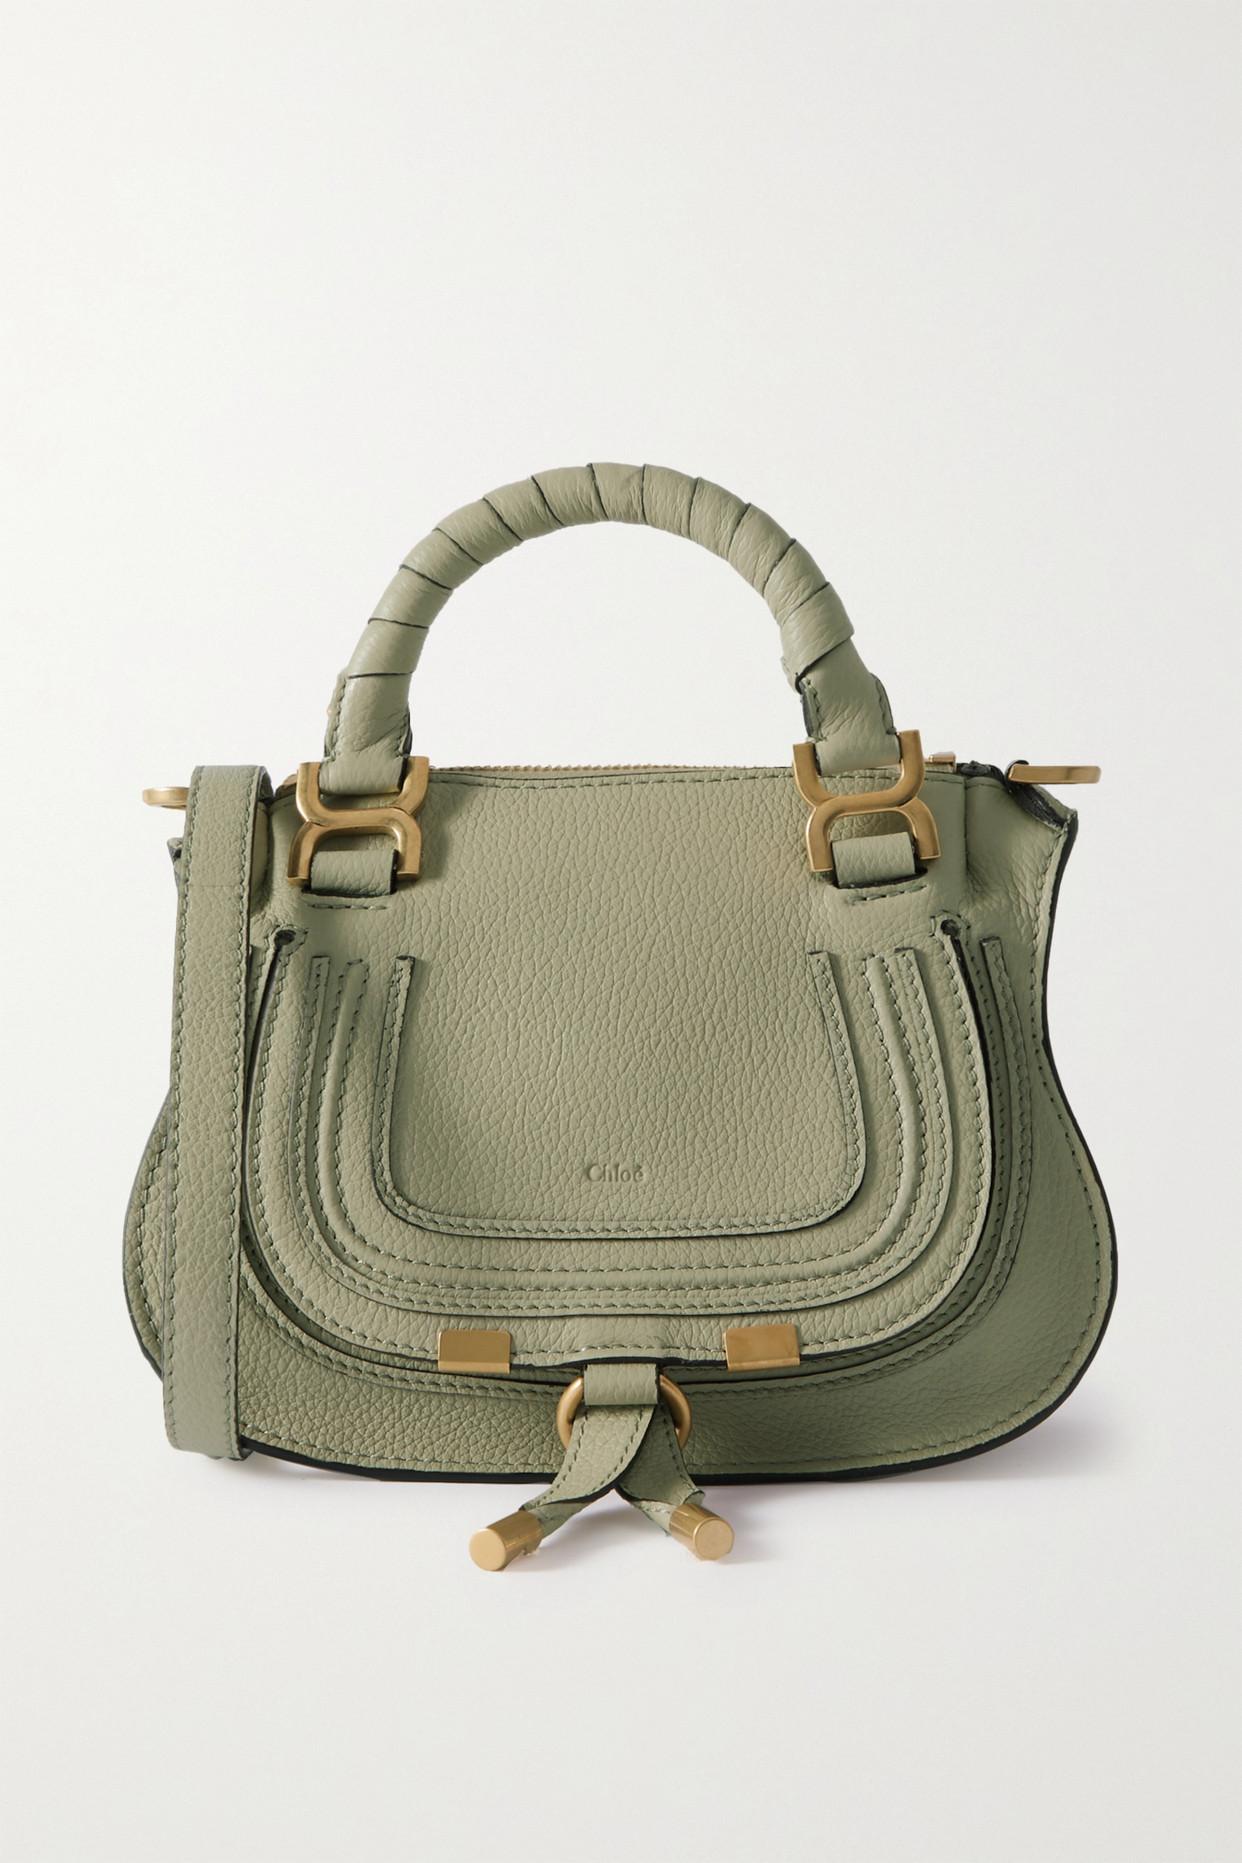 Chloé Marcie Mini Textured-leather Shoulder Bag in Green | Lyst